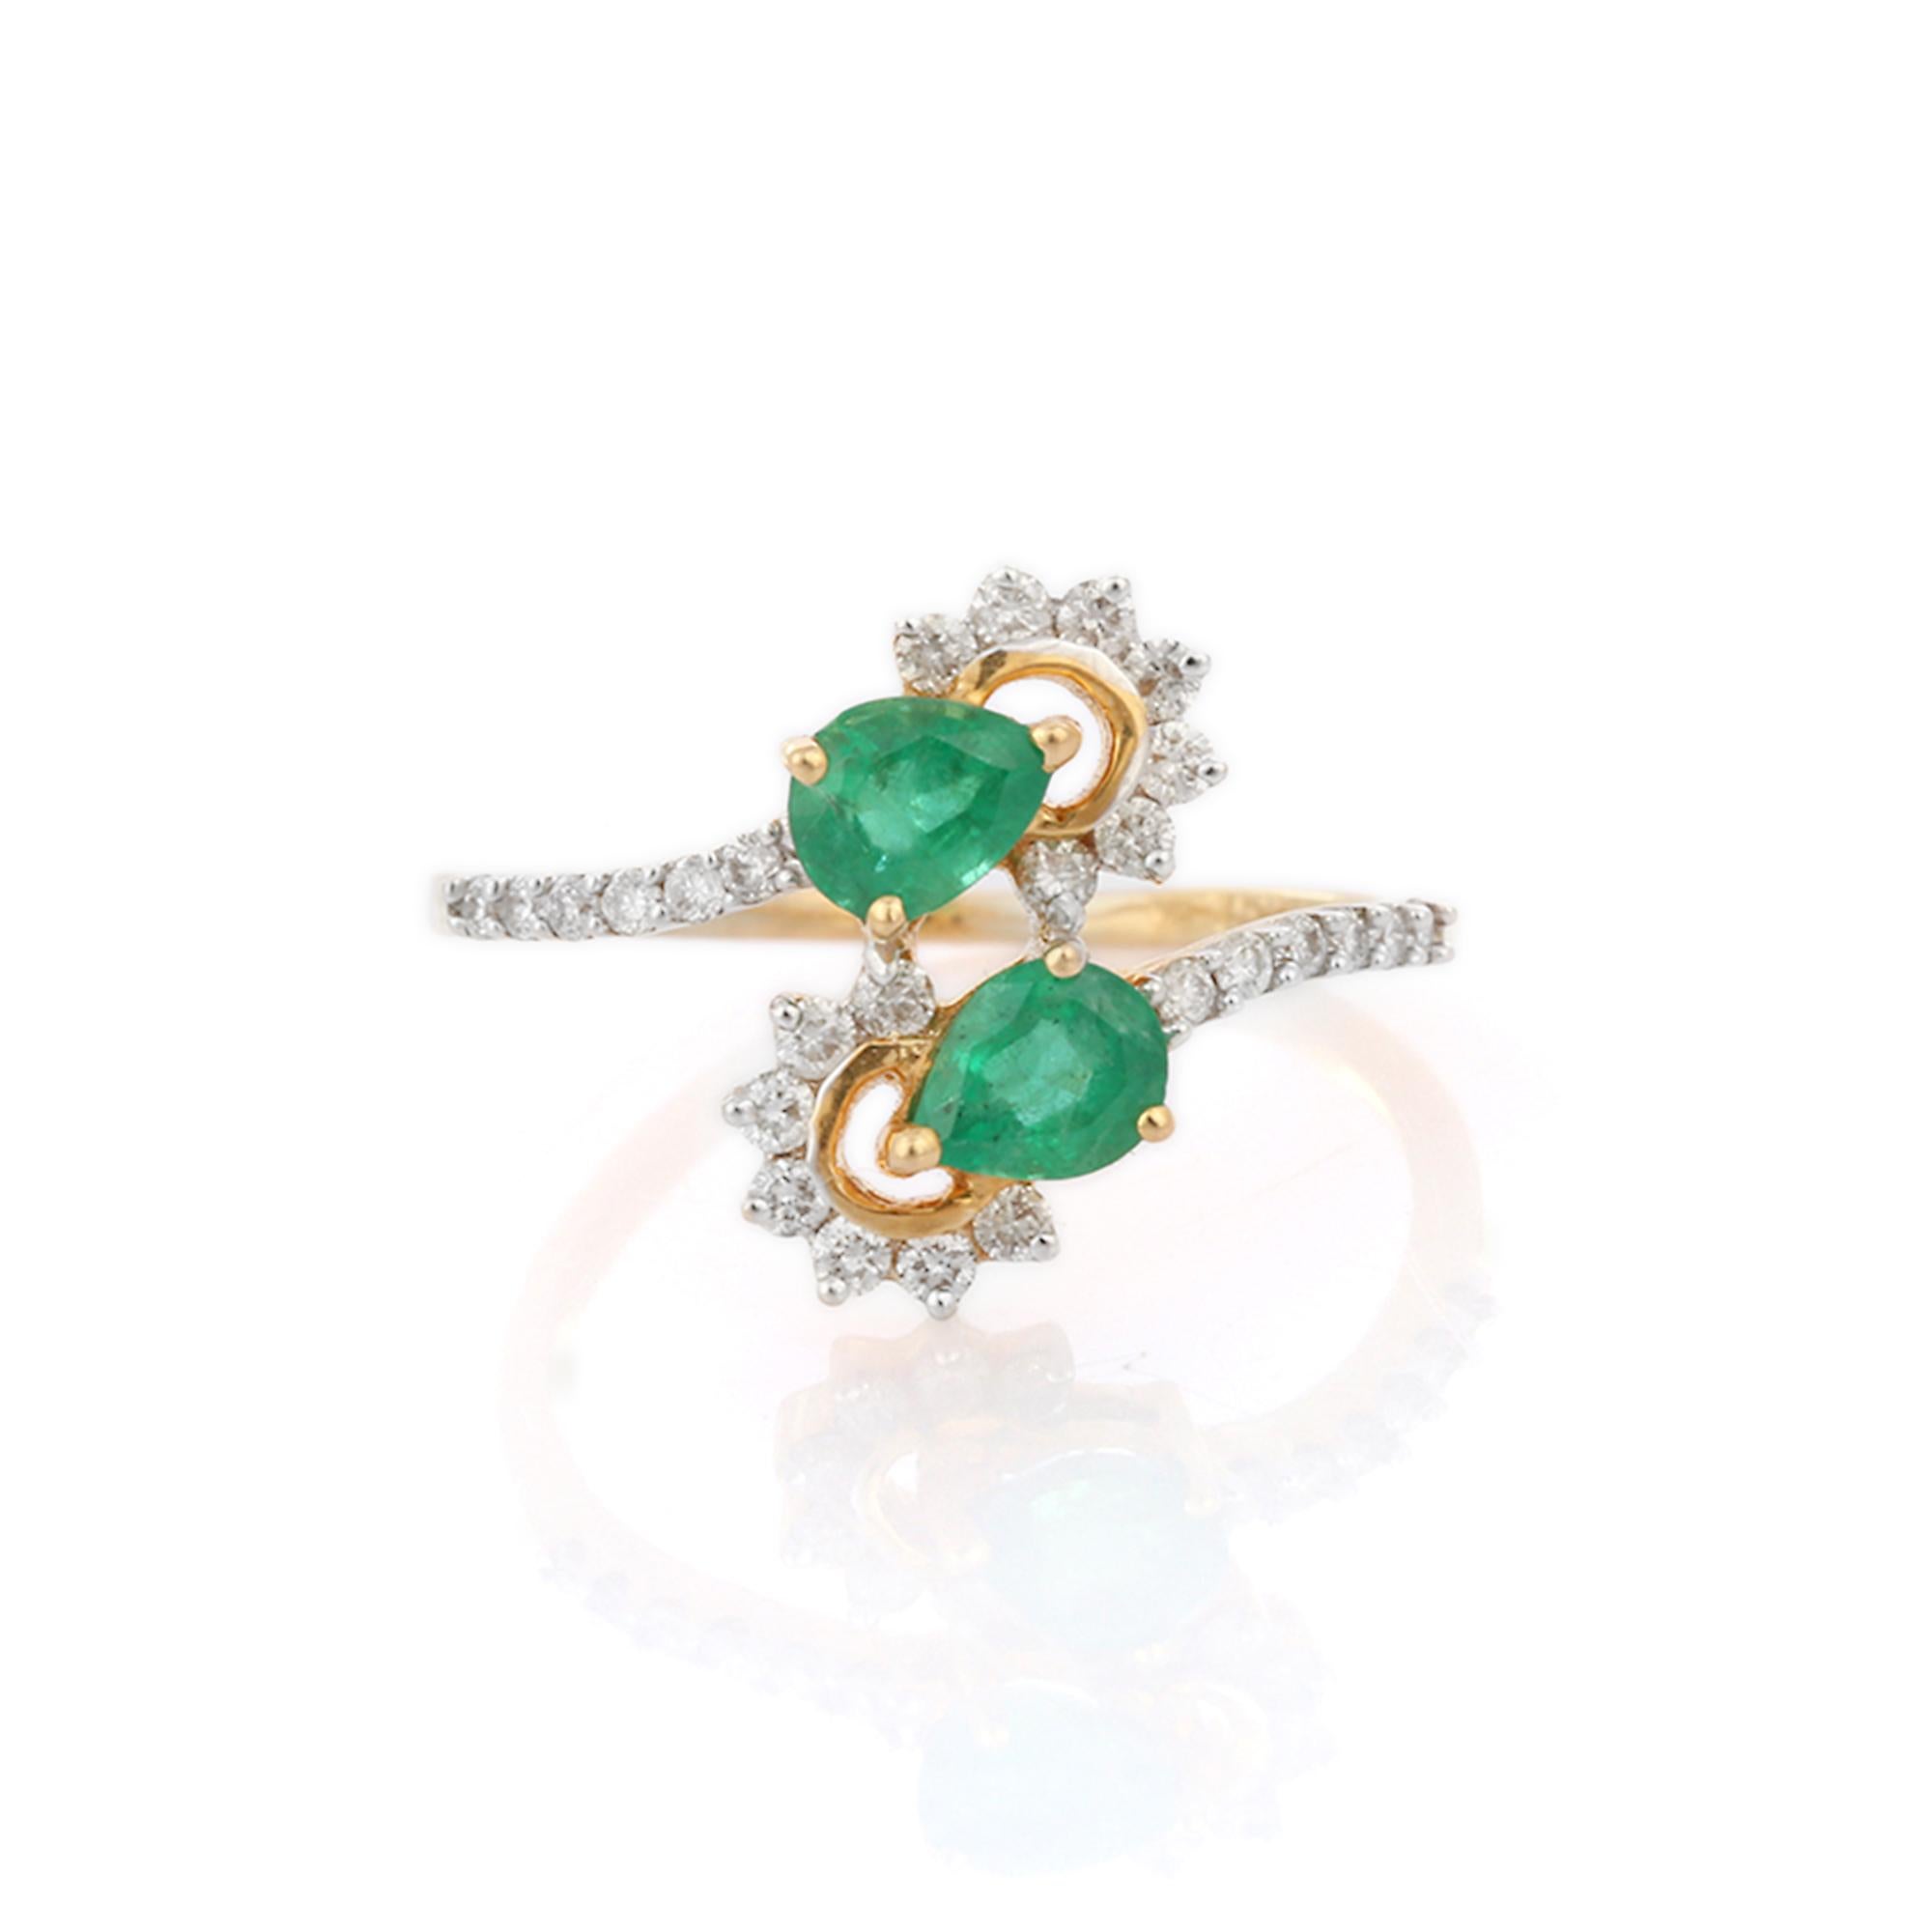 For Sale:  Exquisite Pear Cut Emerald and Diamond Open Ring in 18K Yellow Gold for Her 5